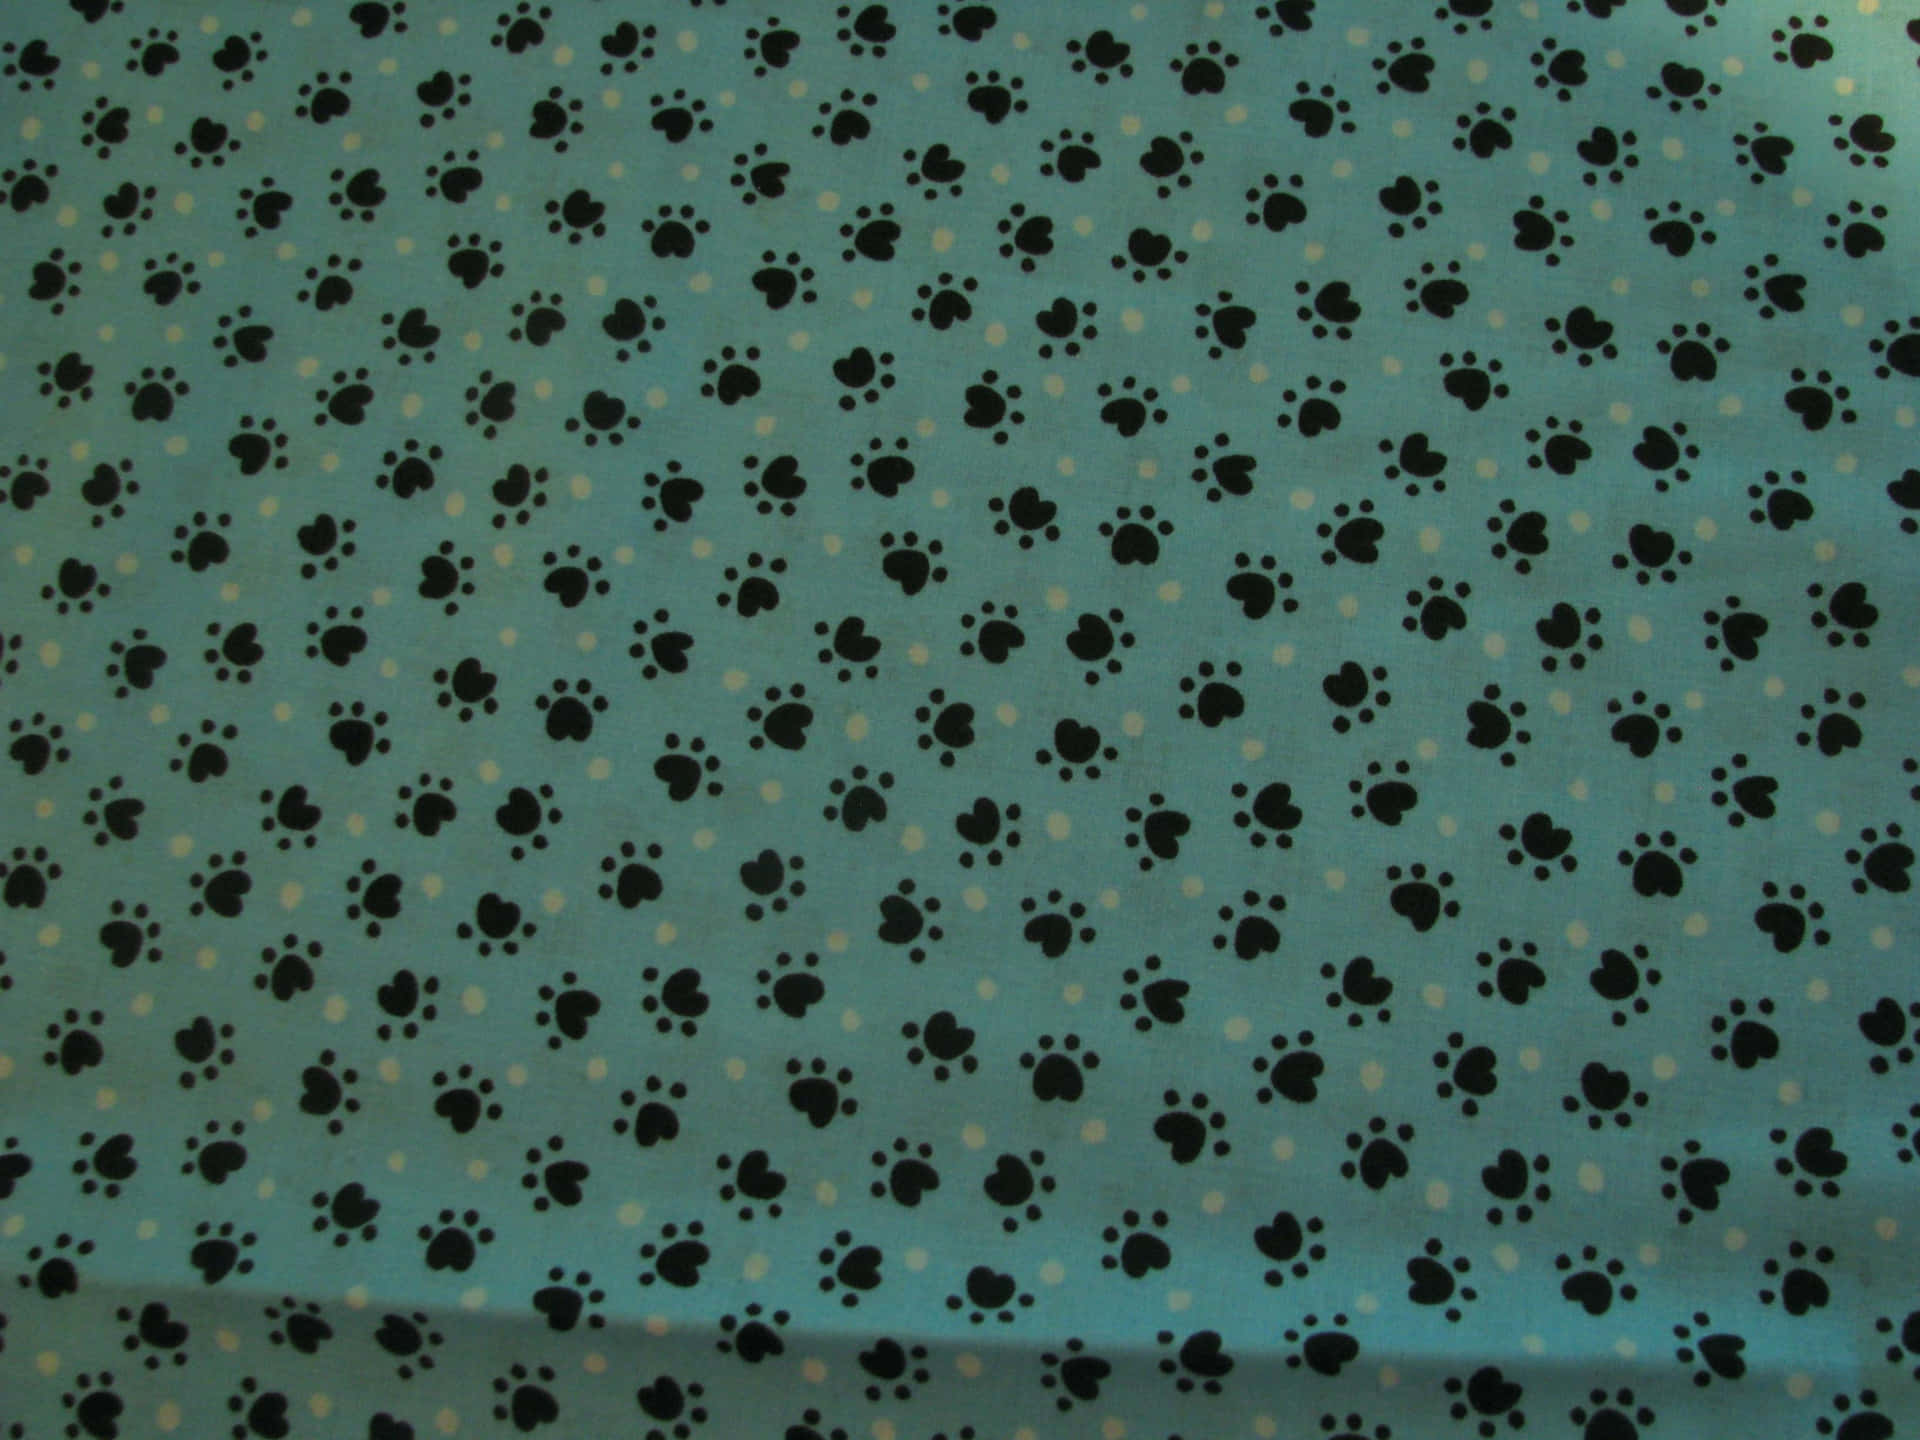 A Blue Fabric With Black Paw Prints On It